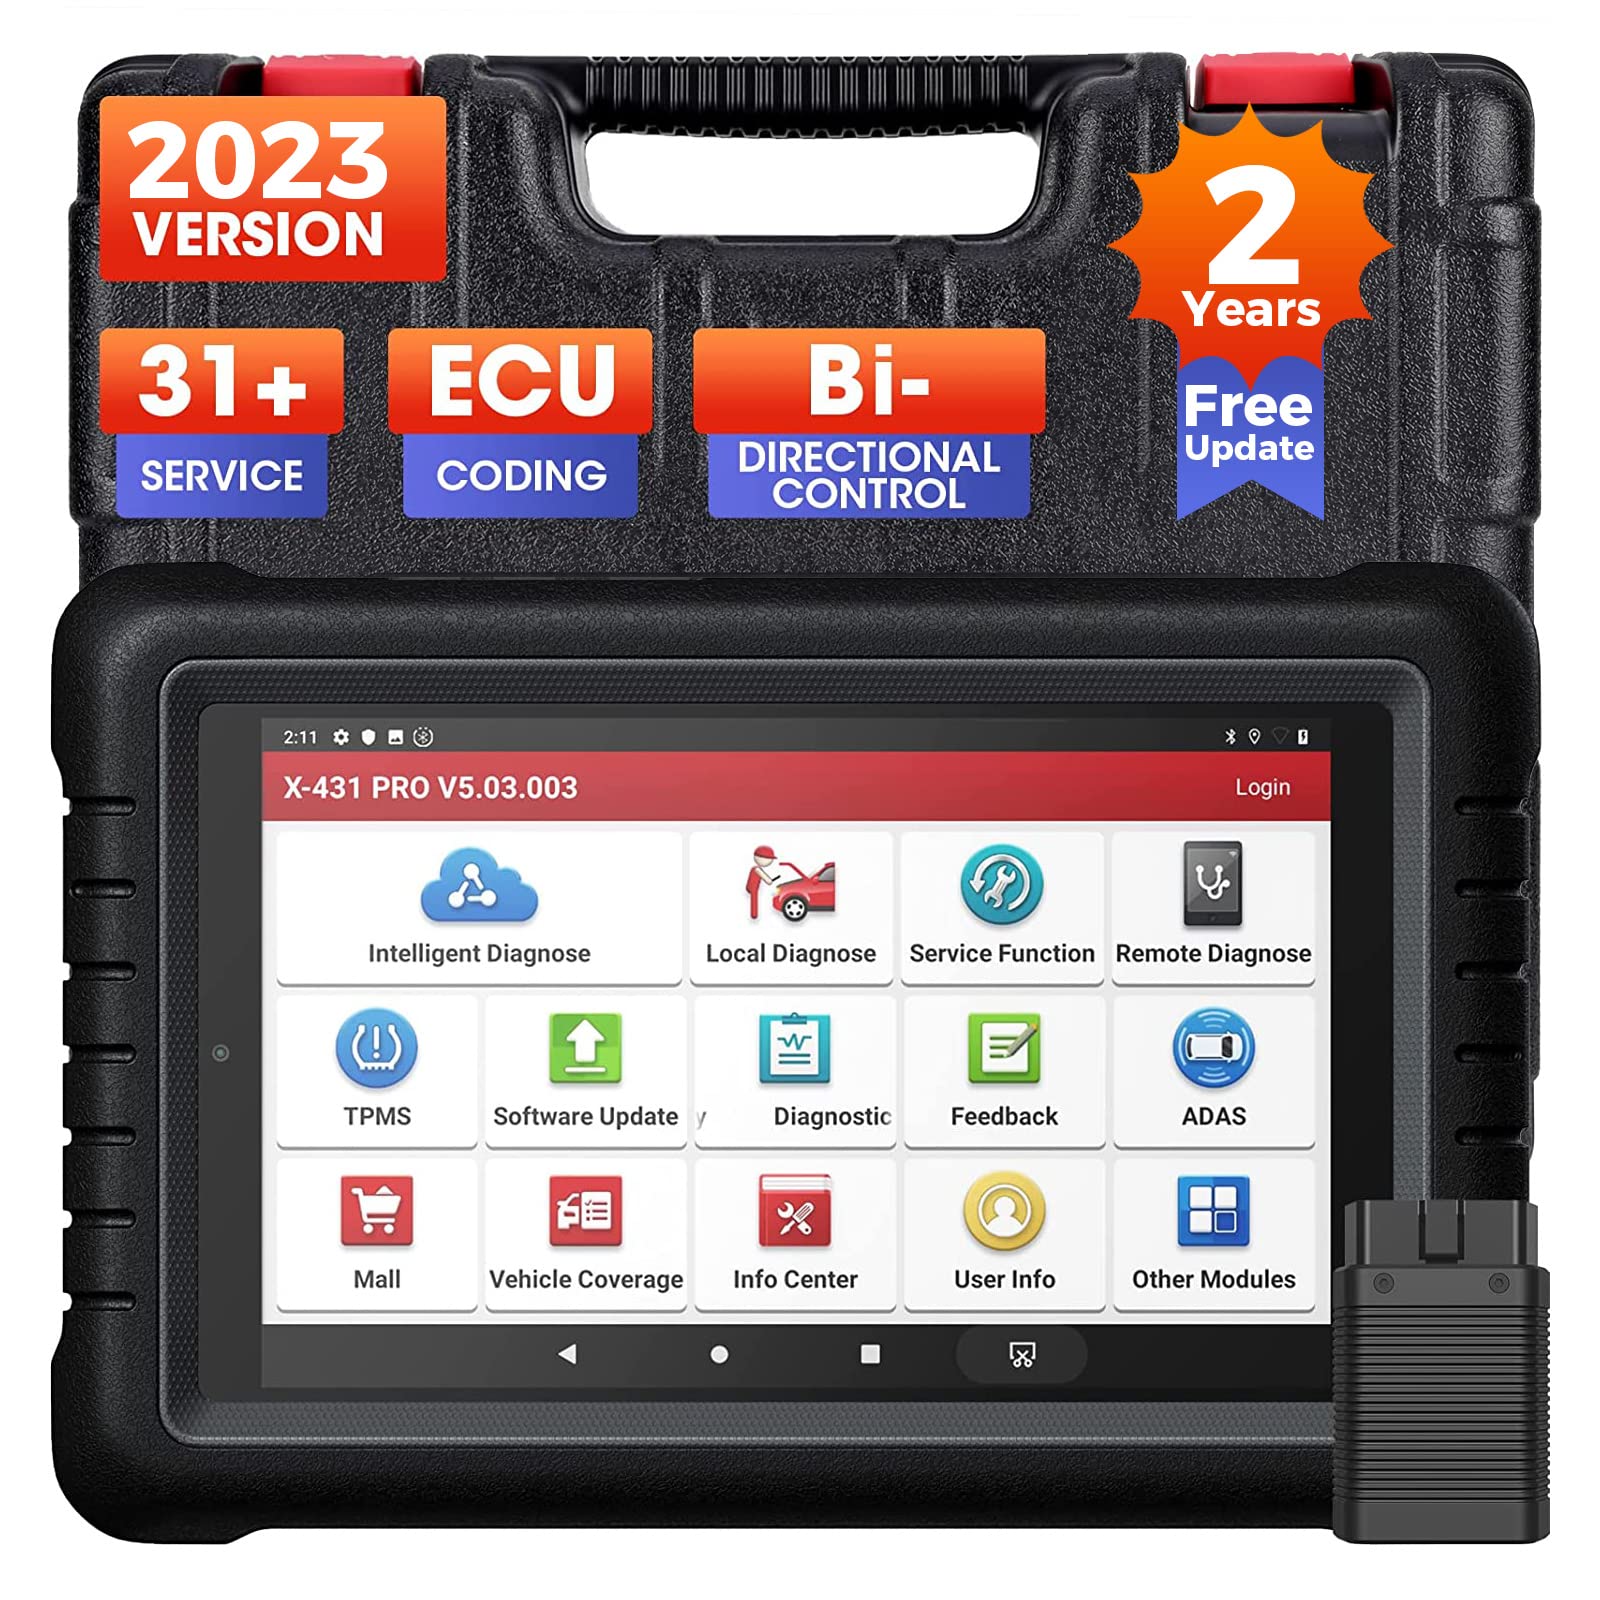 LAUNCH X431 PROS V1.0 Bidirectional OBD2 Scanner All System Scanner Support  ECU Codinng 31+ Services